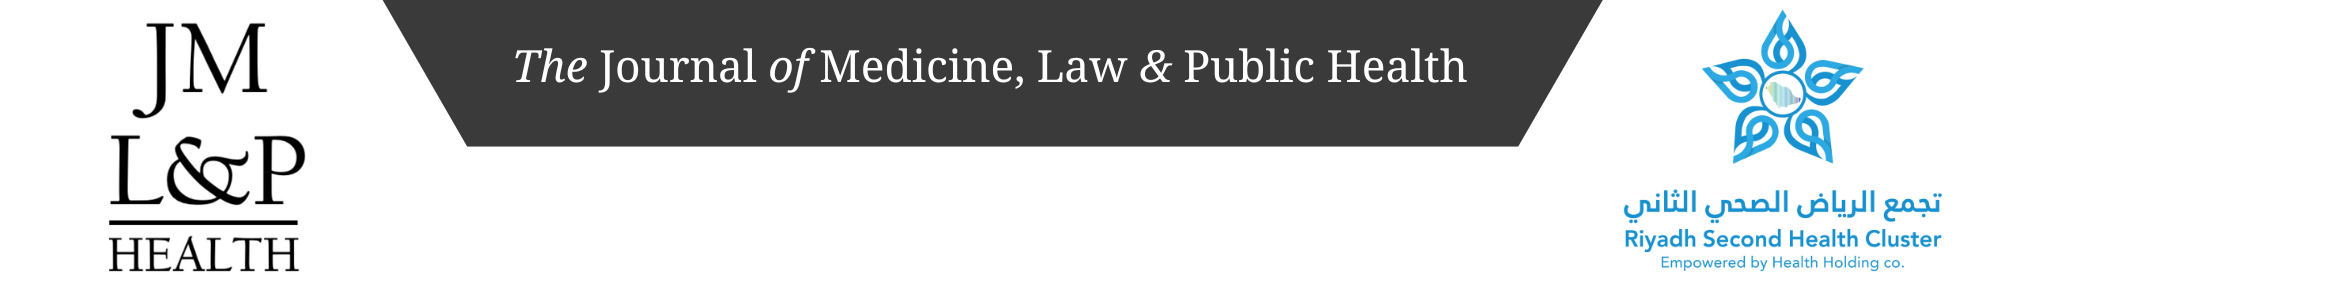 Journal of Medicine, Law and Public Health 